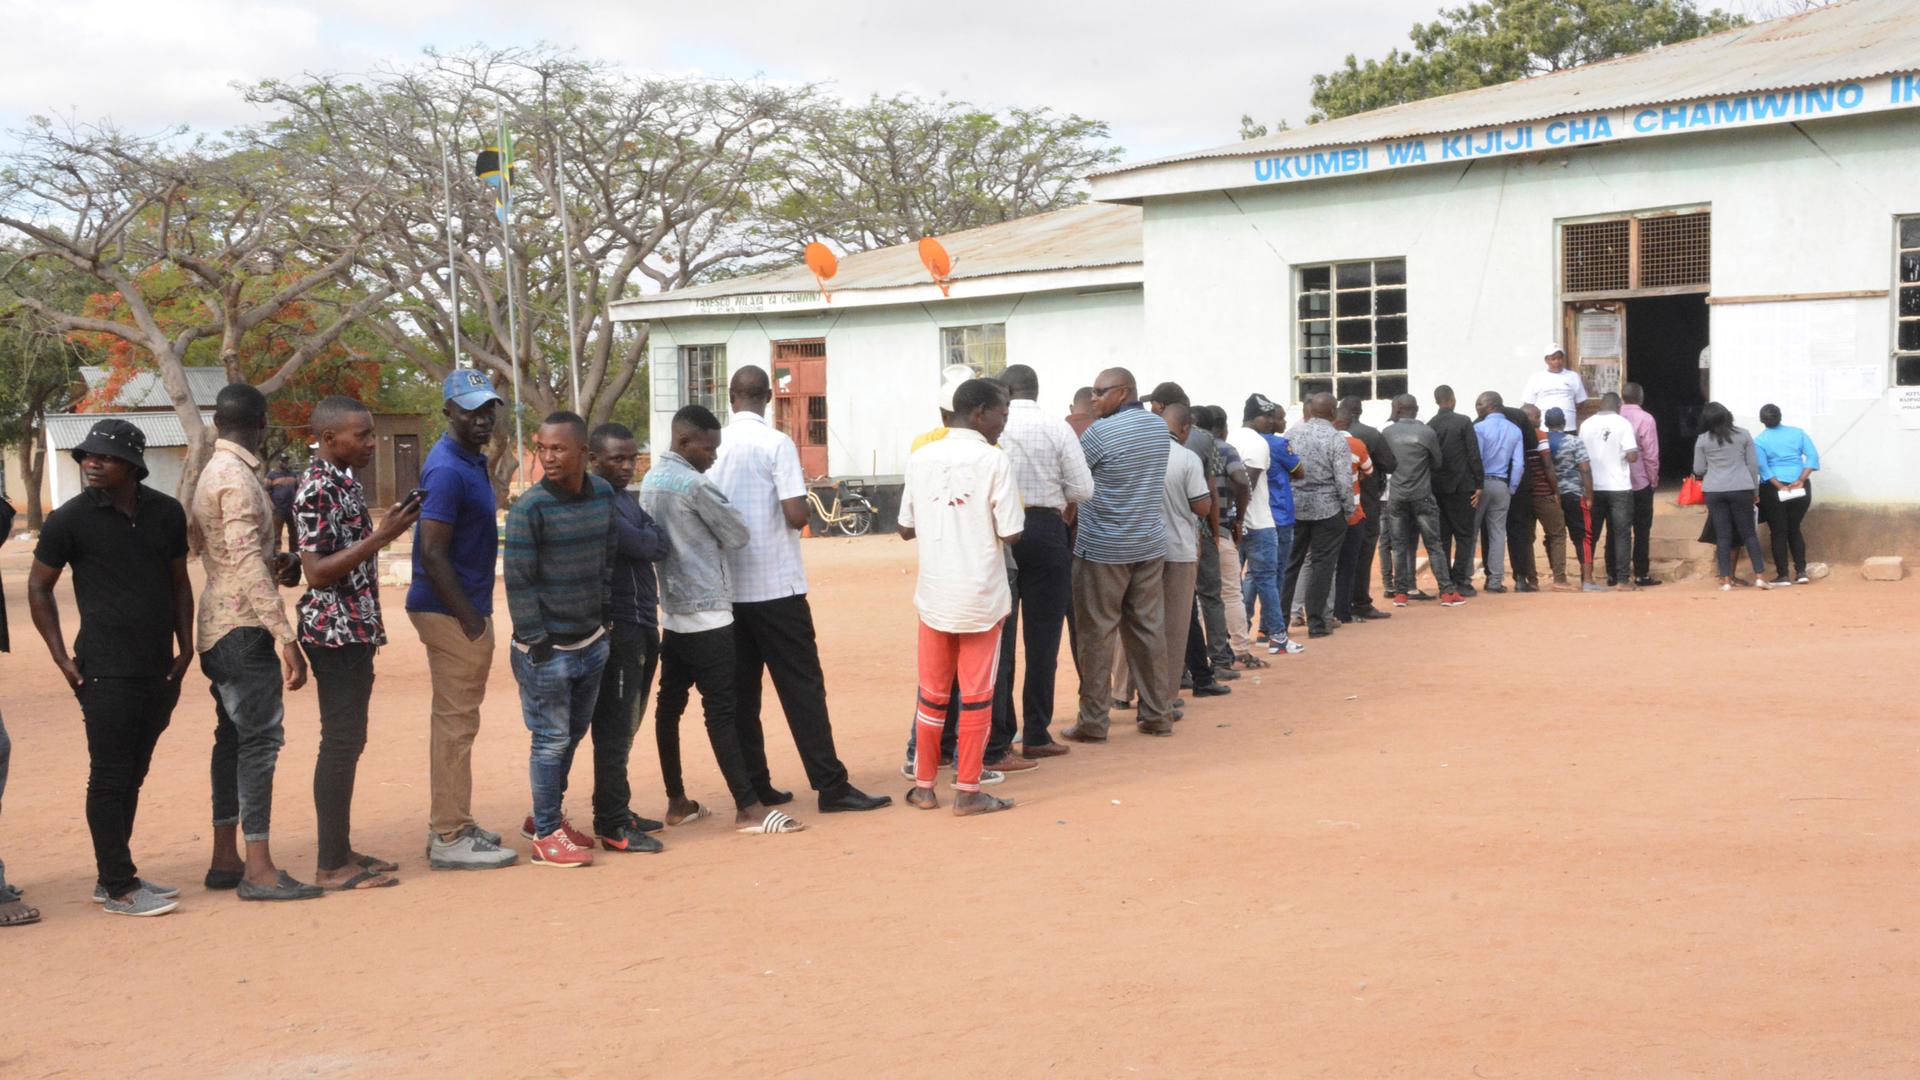 A long line of people are shown standing outside of a polling location in Tanzania.